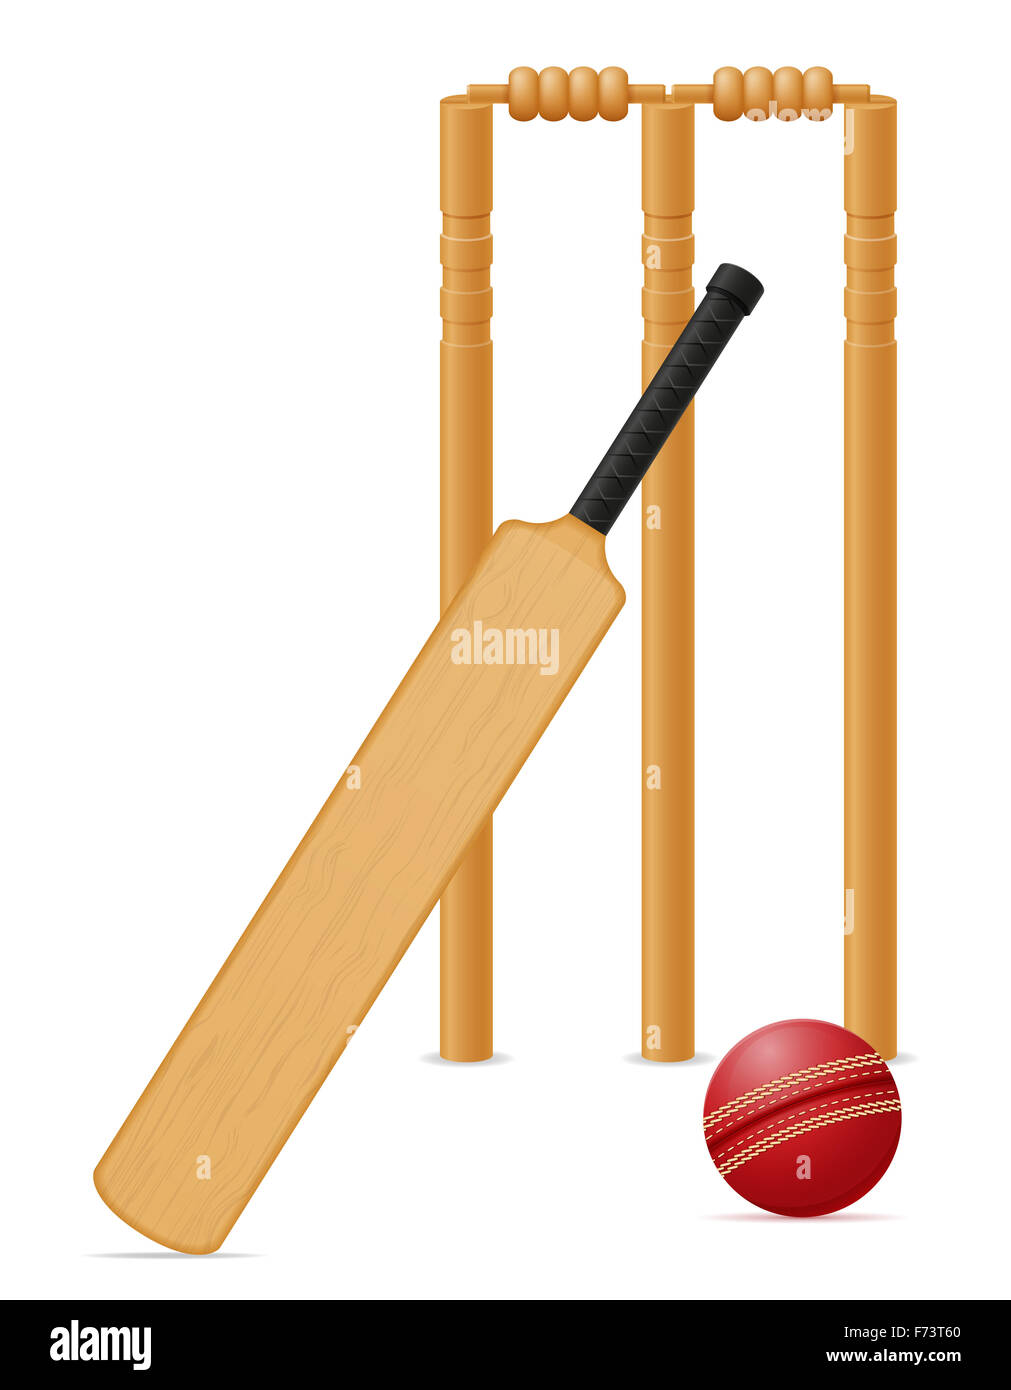 cricket equipment bat ball and wicket illustration isolated on white  background Stock Photo - Alamy